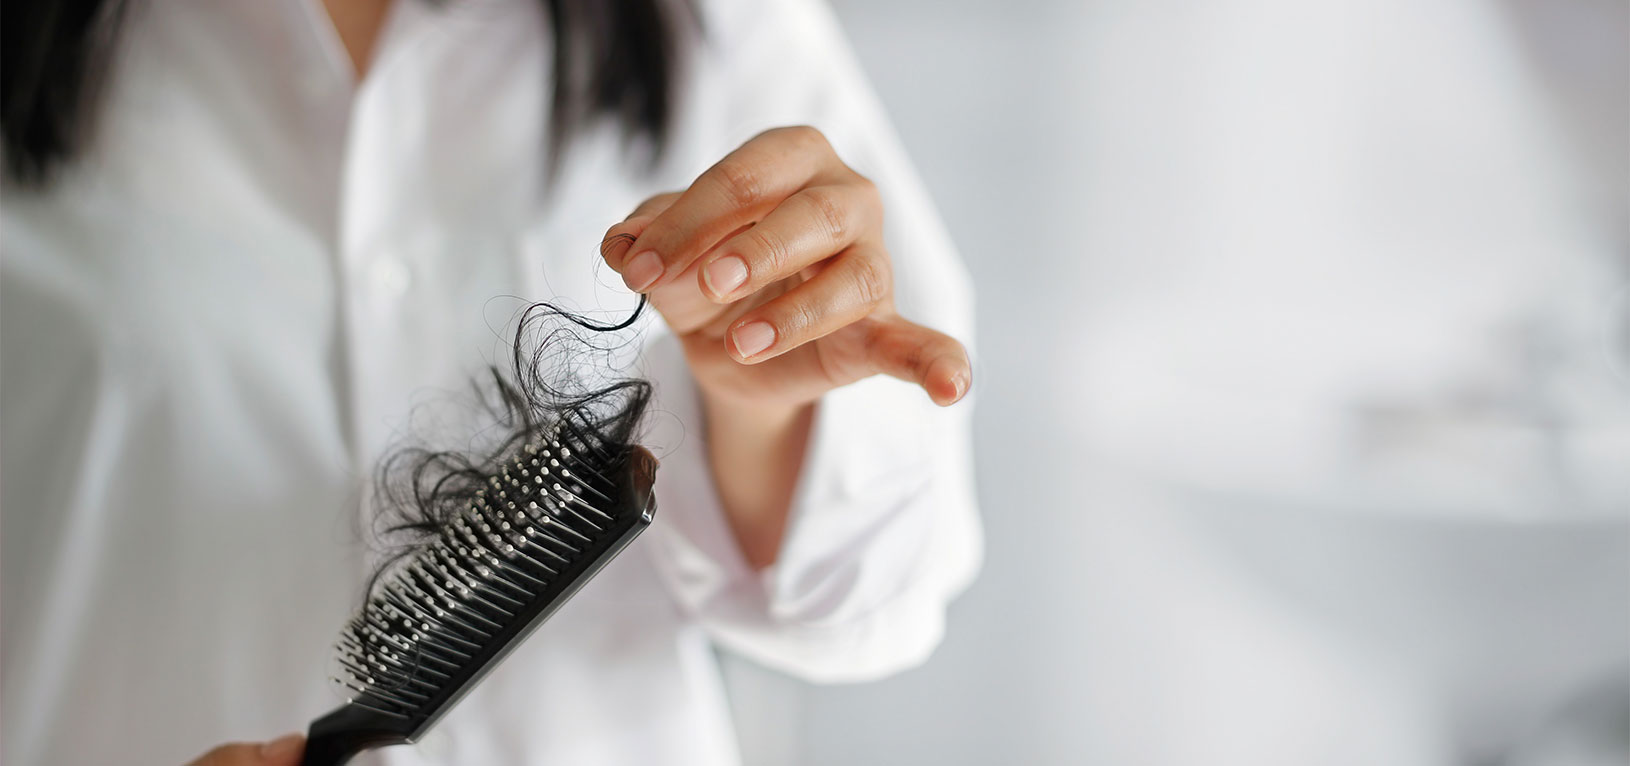 Tulsa Hair Treatments, Hair Replacement and Hair Loss Specialists